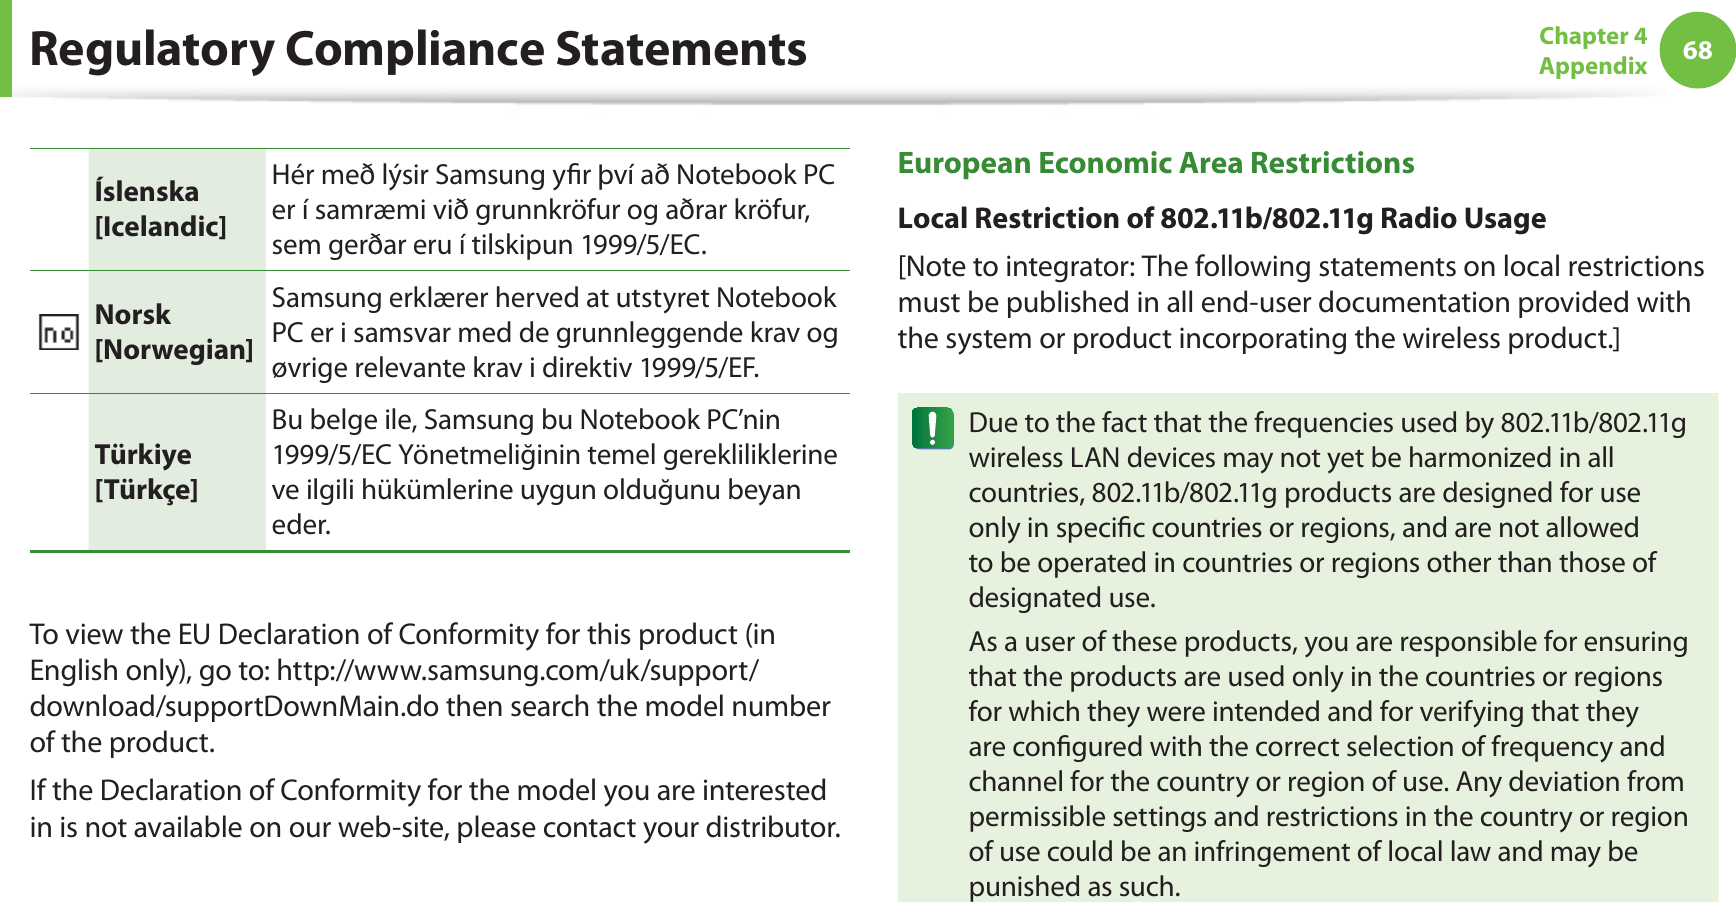 68Chapter 4AppendixRegulatory Compliance StatementsÍslenska[Icelandic]Hér með lýsir Samsung y r því að Notebook PC er í samræmi við grunnkröfur og aðrar kröfur, sem gerðar eru í tilskipun 1999/5/EC.Norsk[Norwegian]Samsung erklærer herved at utstyret Notebook PC er i samsvar med de grunnleggende krav og øvrige relevante krav i direktiv 1999/5/EF.Türkiye[Türkçe]Bu belge ile, Samsung bu Notebook PC’nin 1999/5/EC Yönetmeliğinin temel gerekliliklerine ve ilgili hükümlerine uygun olduğunu beyan eder.To view the EU Declaration of Conformity for this product (in English only), go to: http://www.samsung.com/uk/support/download/supportDownMain.do then search the model number of the product.If the Declaration of Conformity for the model you are interested in is not available on our web-site, please contact your distributor.European Economic Area RestrictionsLocal Restriction of 802.11b/802.11g Radio Usage[Note to integrator: The following statements on local restrictions must be published in all end-user documentation provided with the system or product incorporating the wireless product.]Due to the fact that the frequencies used by 802.11b/802.11g wireless LAN devices may not yet be harmonized in all countries, 802.11b/802.11g products are designed for use only in speci c countries or regions, and are not allowed to be operated in countries or regions other than those of designated use.As a user of these products, you are responsible for ensuring that the products are used only in the countries or regions for which they were intended and for verifying that they are con gured with the correct selection of frequency and channel for the country or region of use. Any deviation from permissible settings and restrictions in the country or region of use could be an infringement of local law and may be punished as such.